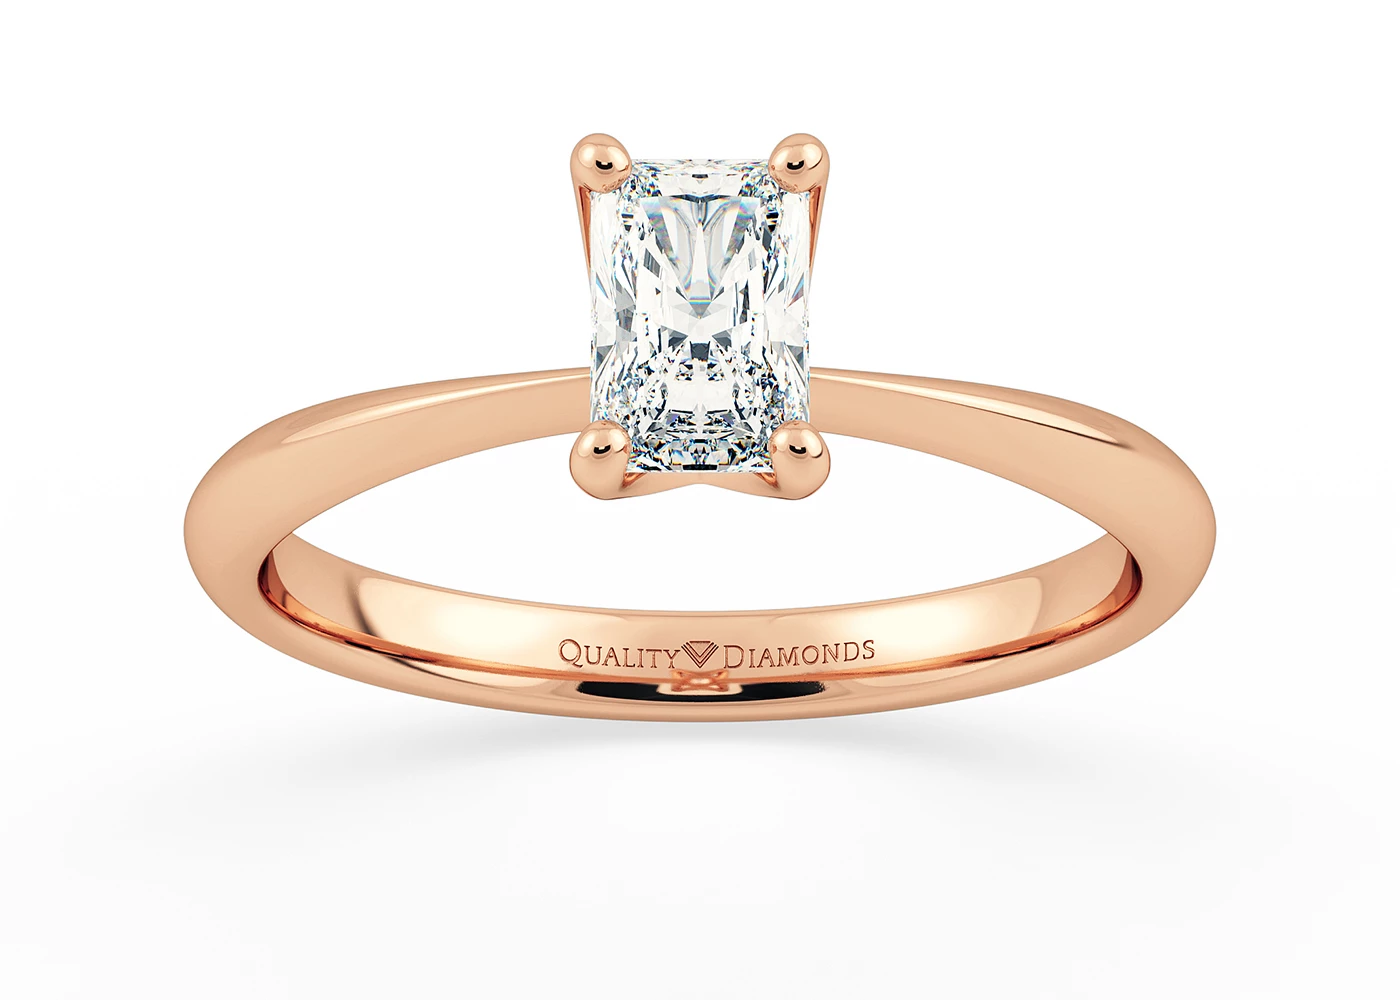 Two Carat Radiant Solitaire Diamond Engagement Ring in 18K Rose Gold